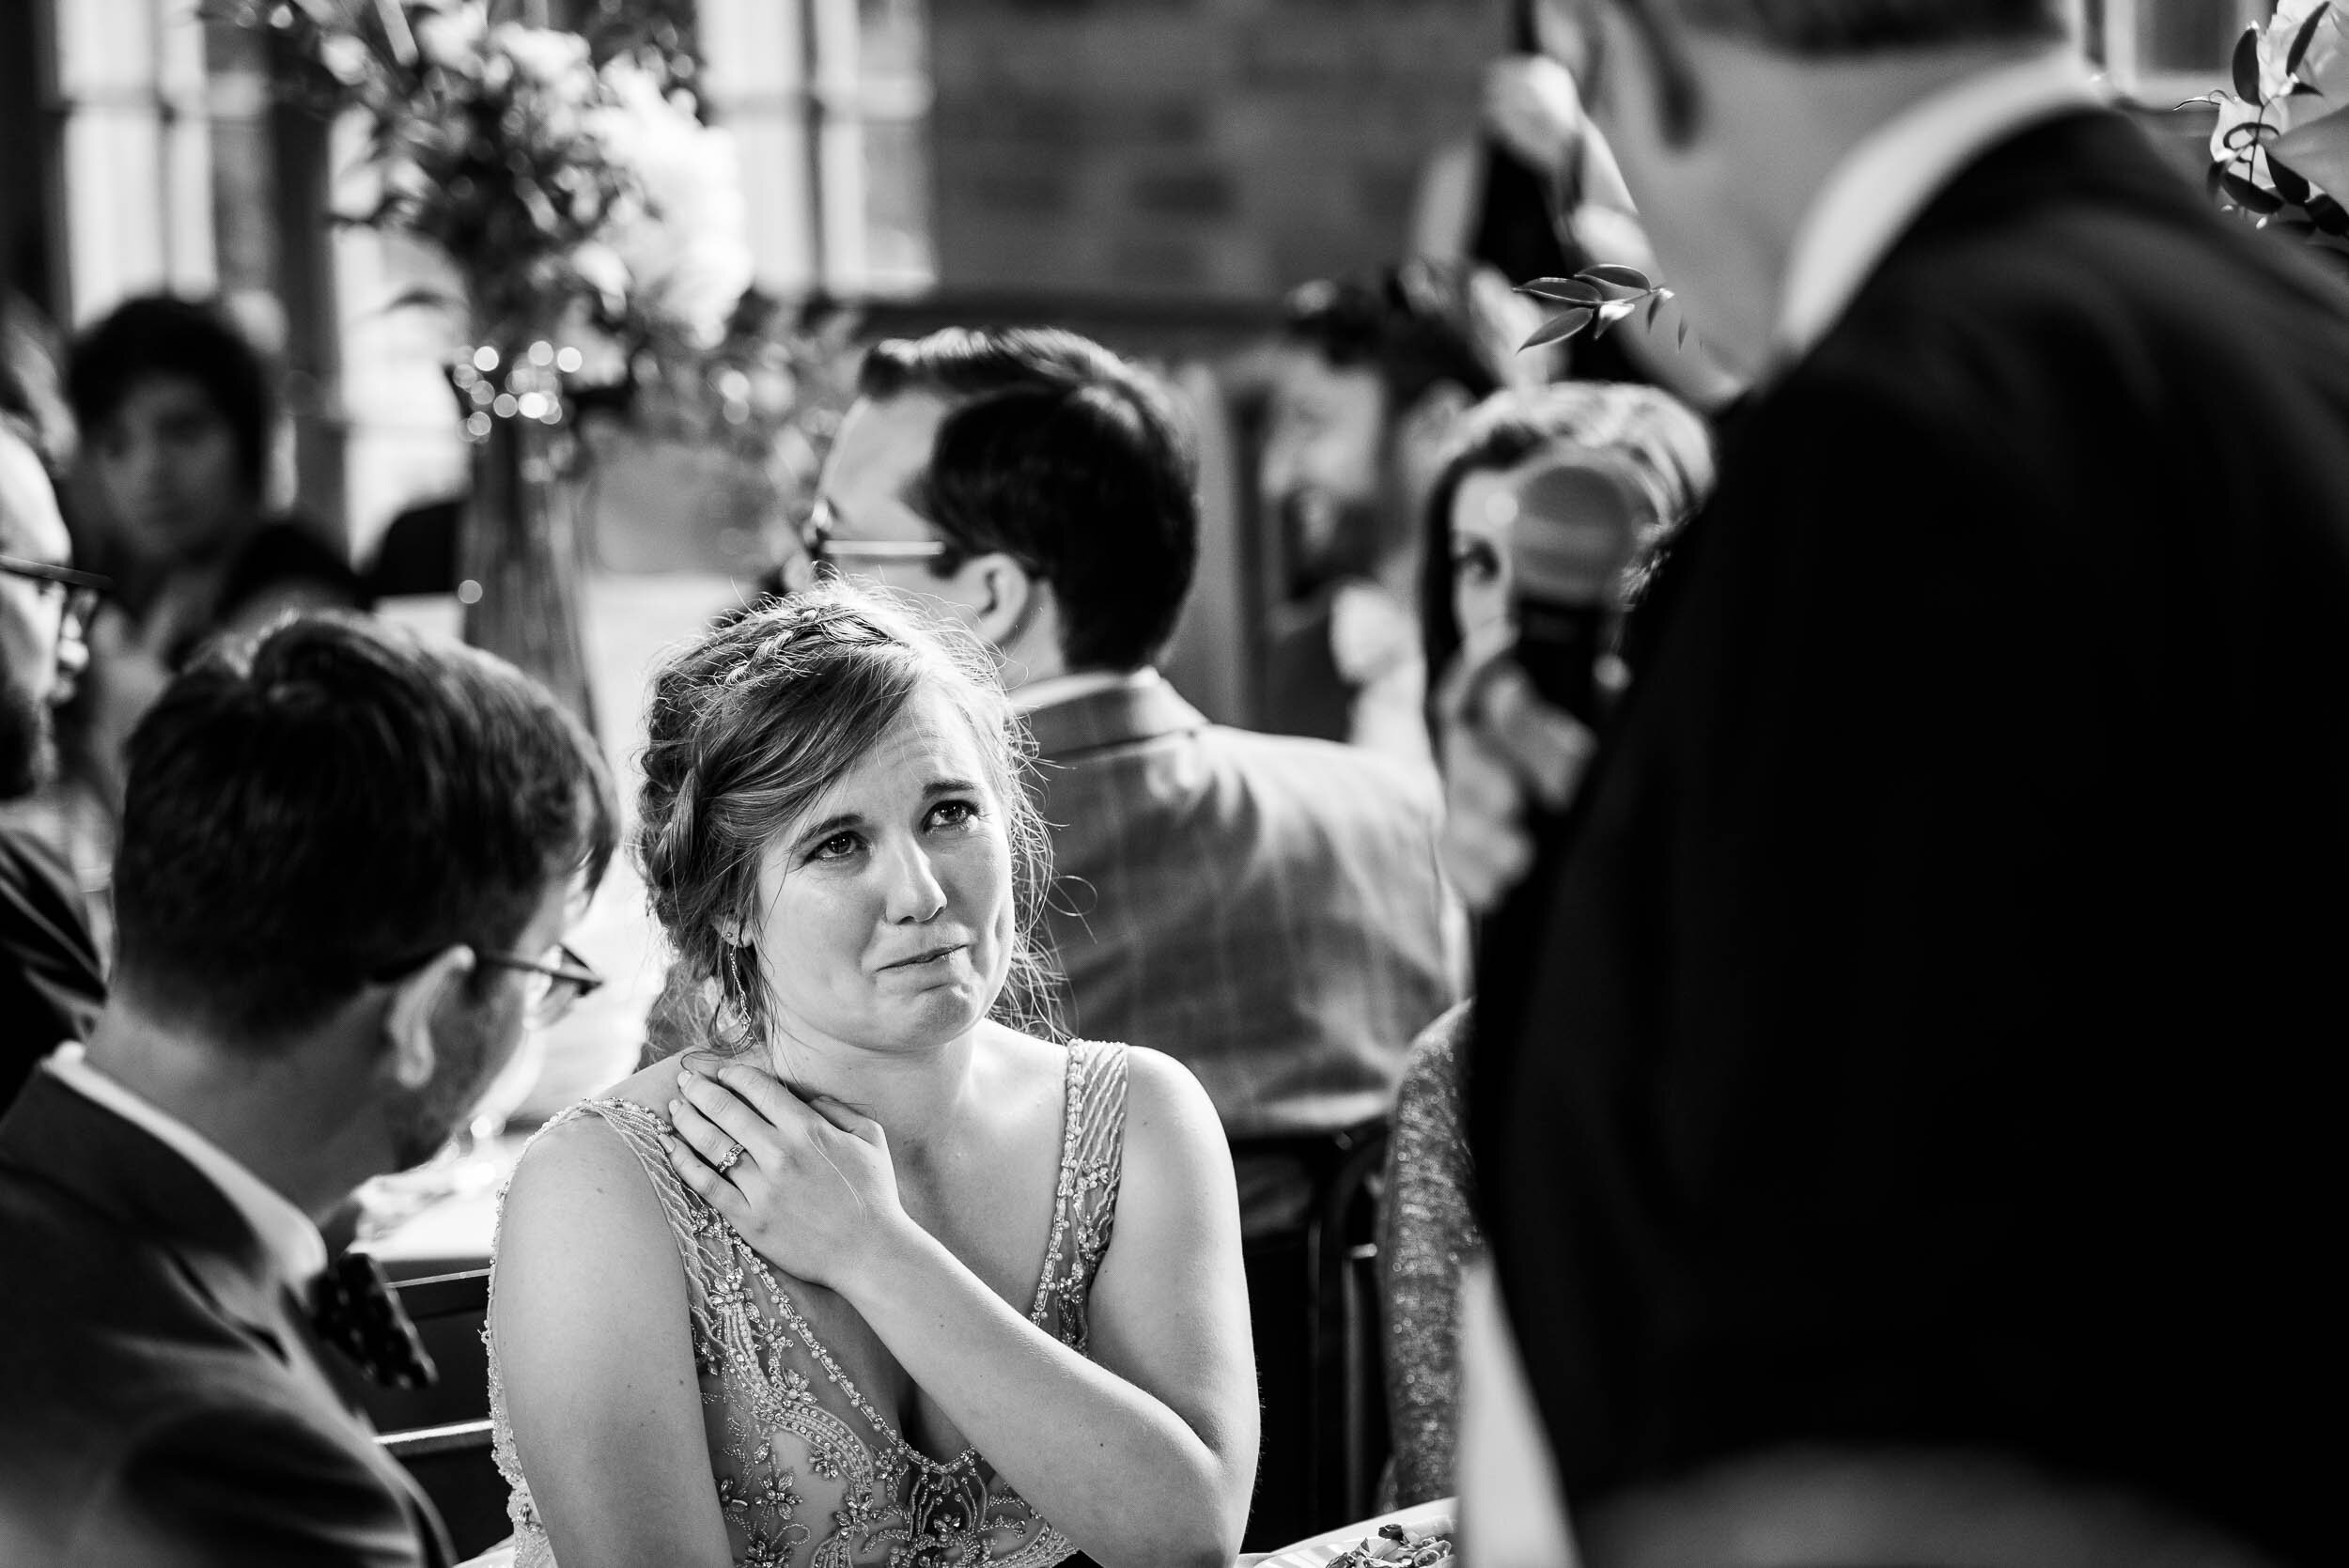 Bride gets emotional during her father's speech: Columbus Park Refectory Chicago wedding captured by J. Brown Photography.